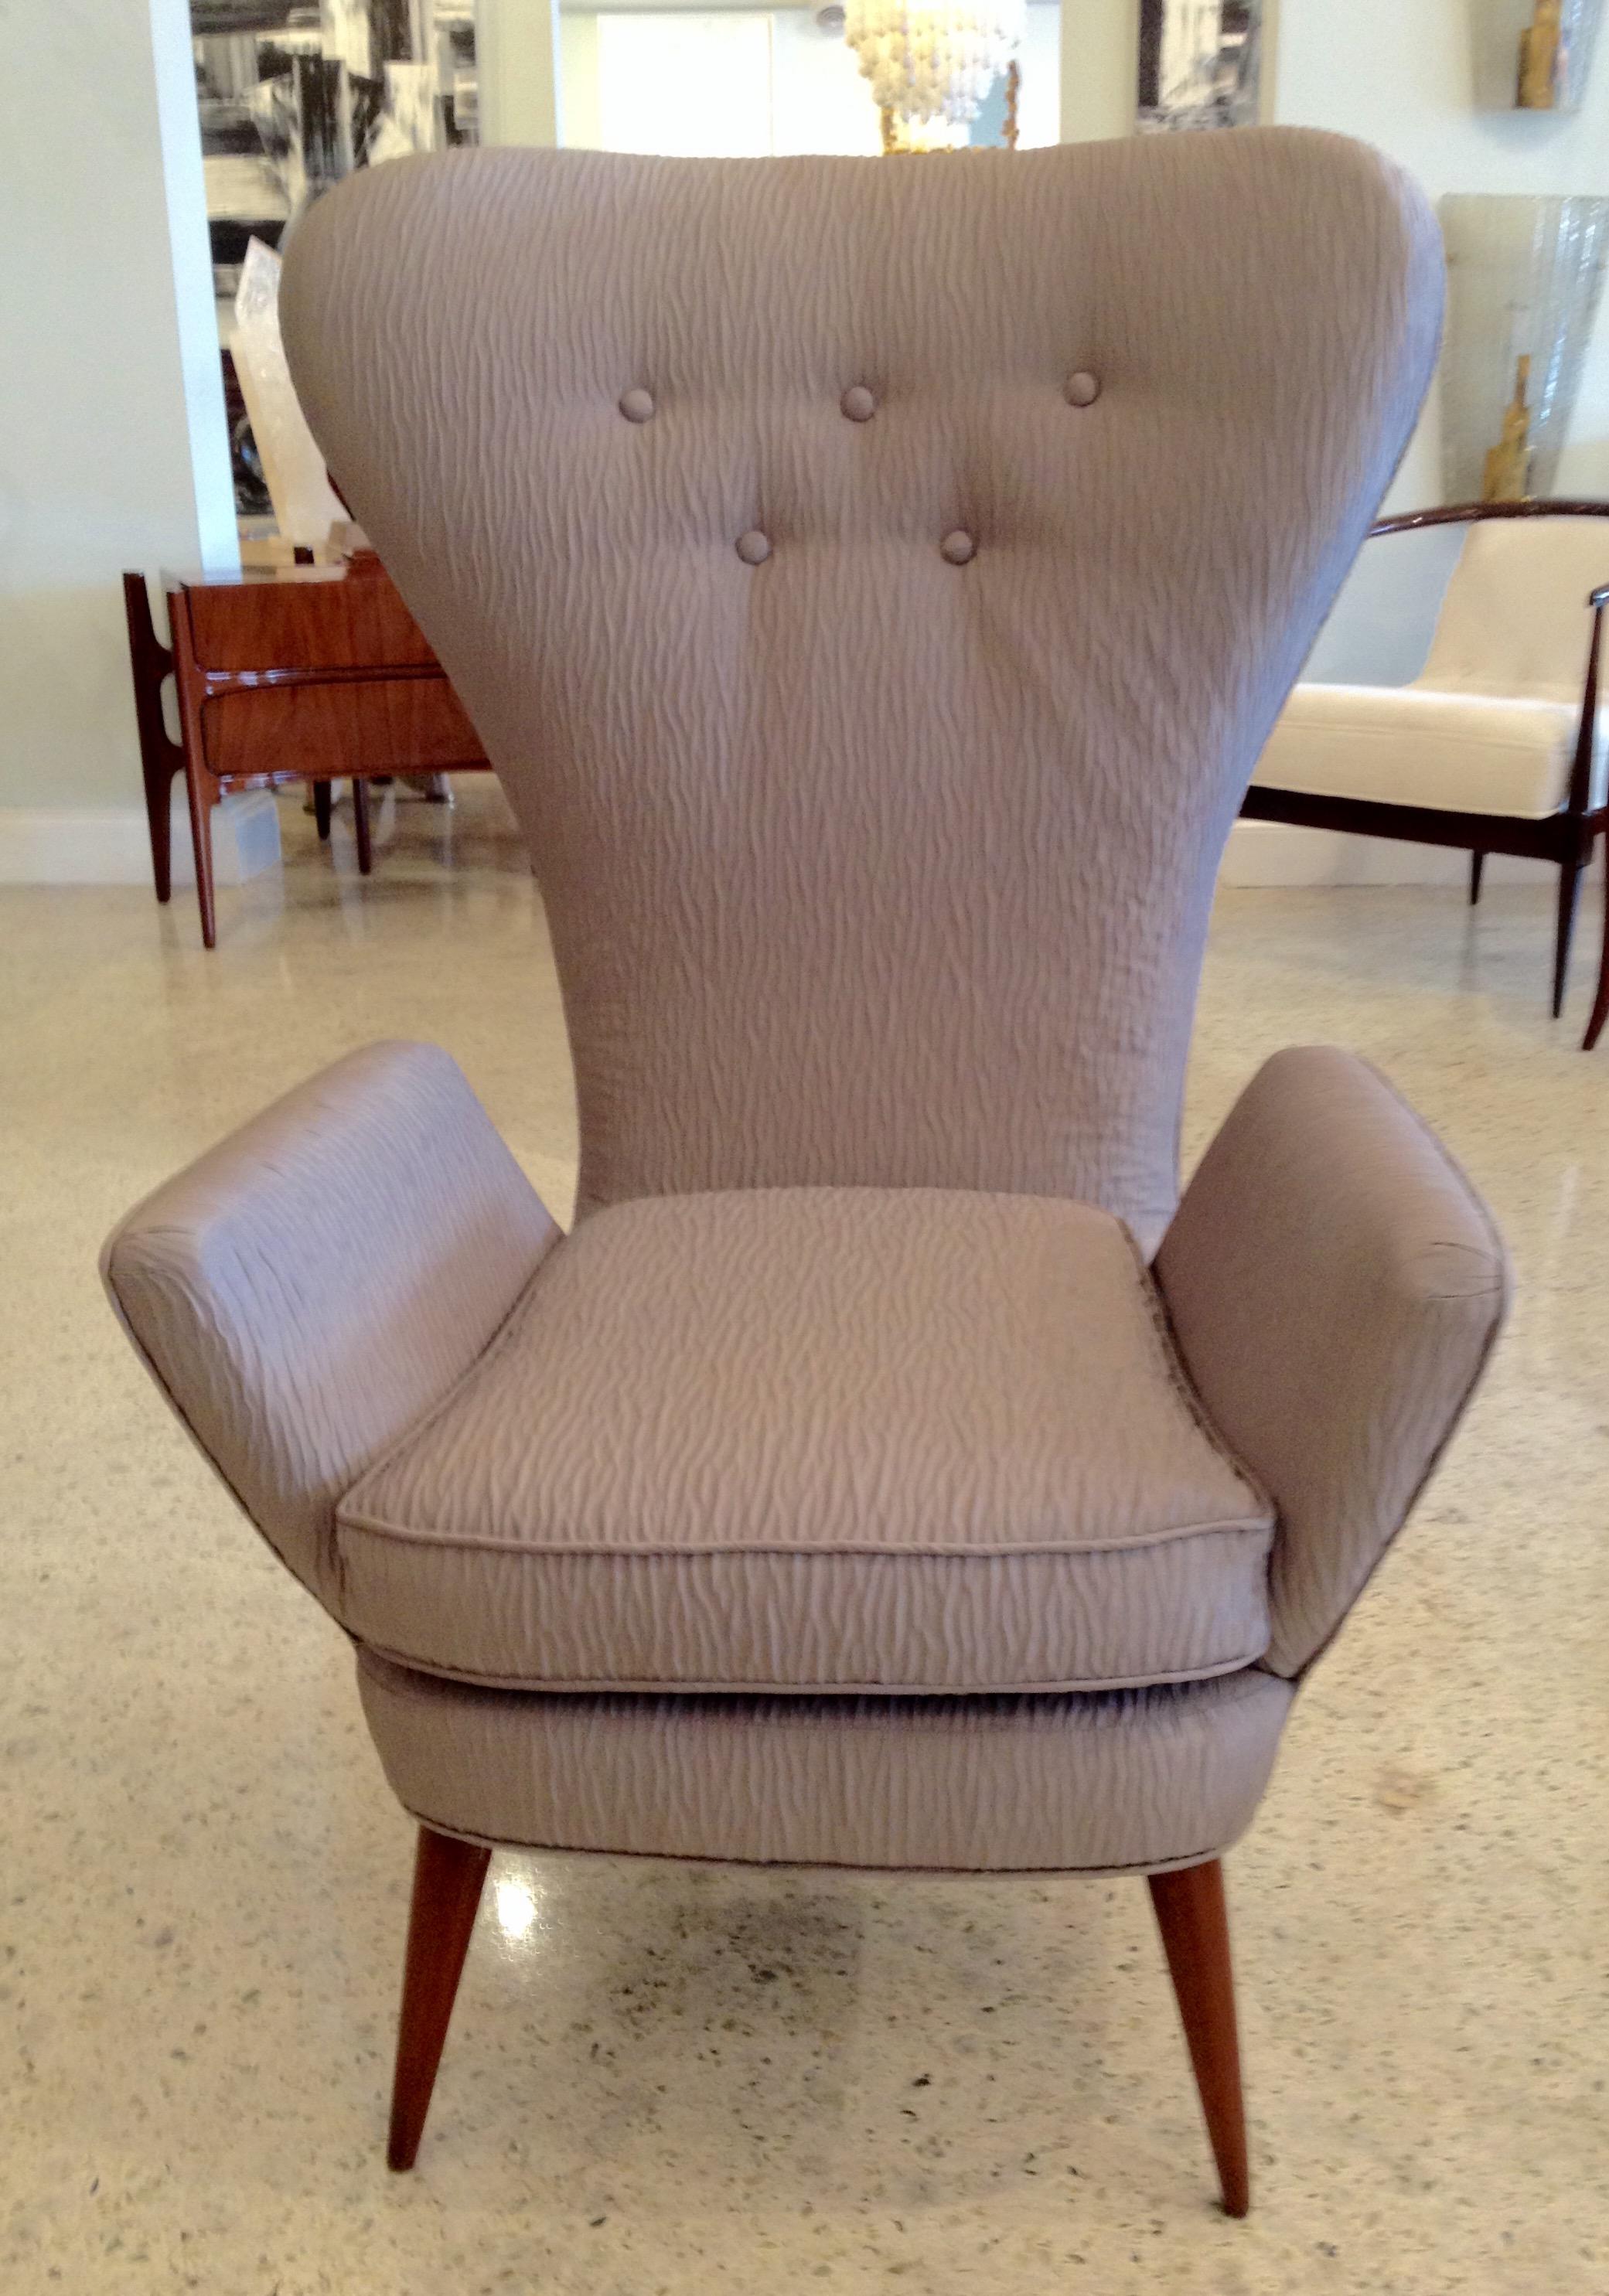 Pair of Italian Modern High Back Chairs In Good Condition For Sale In Hollywood, FL